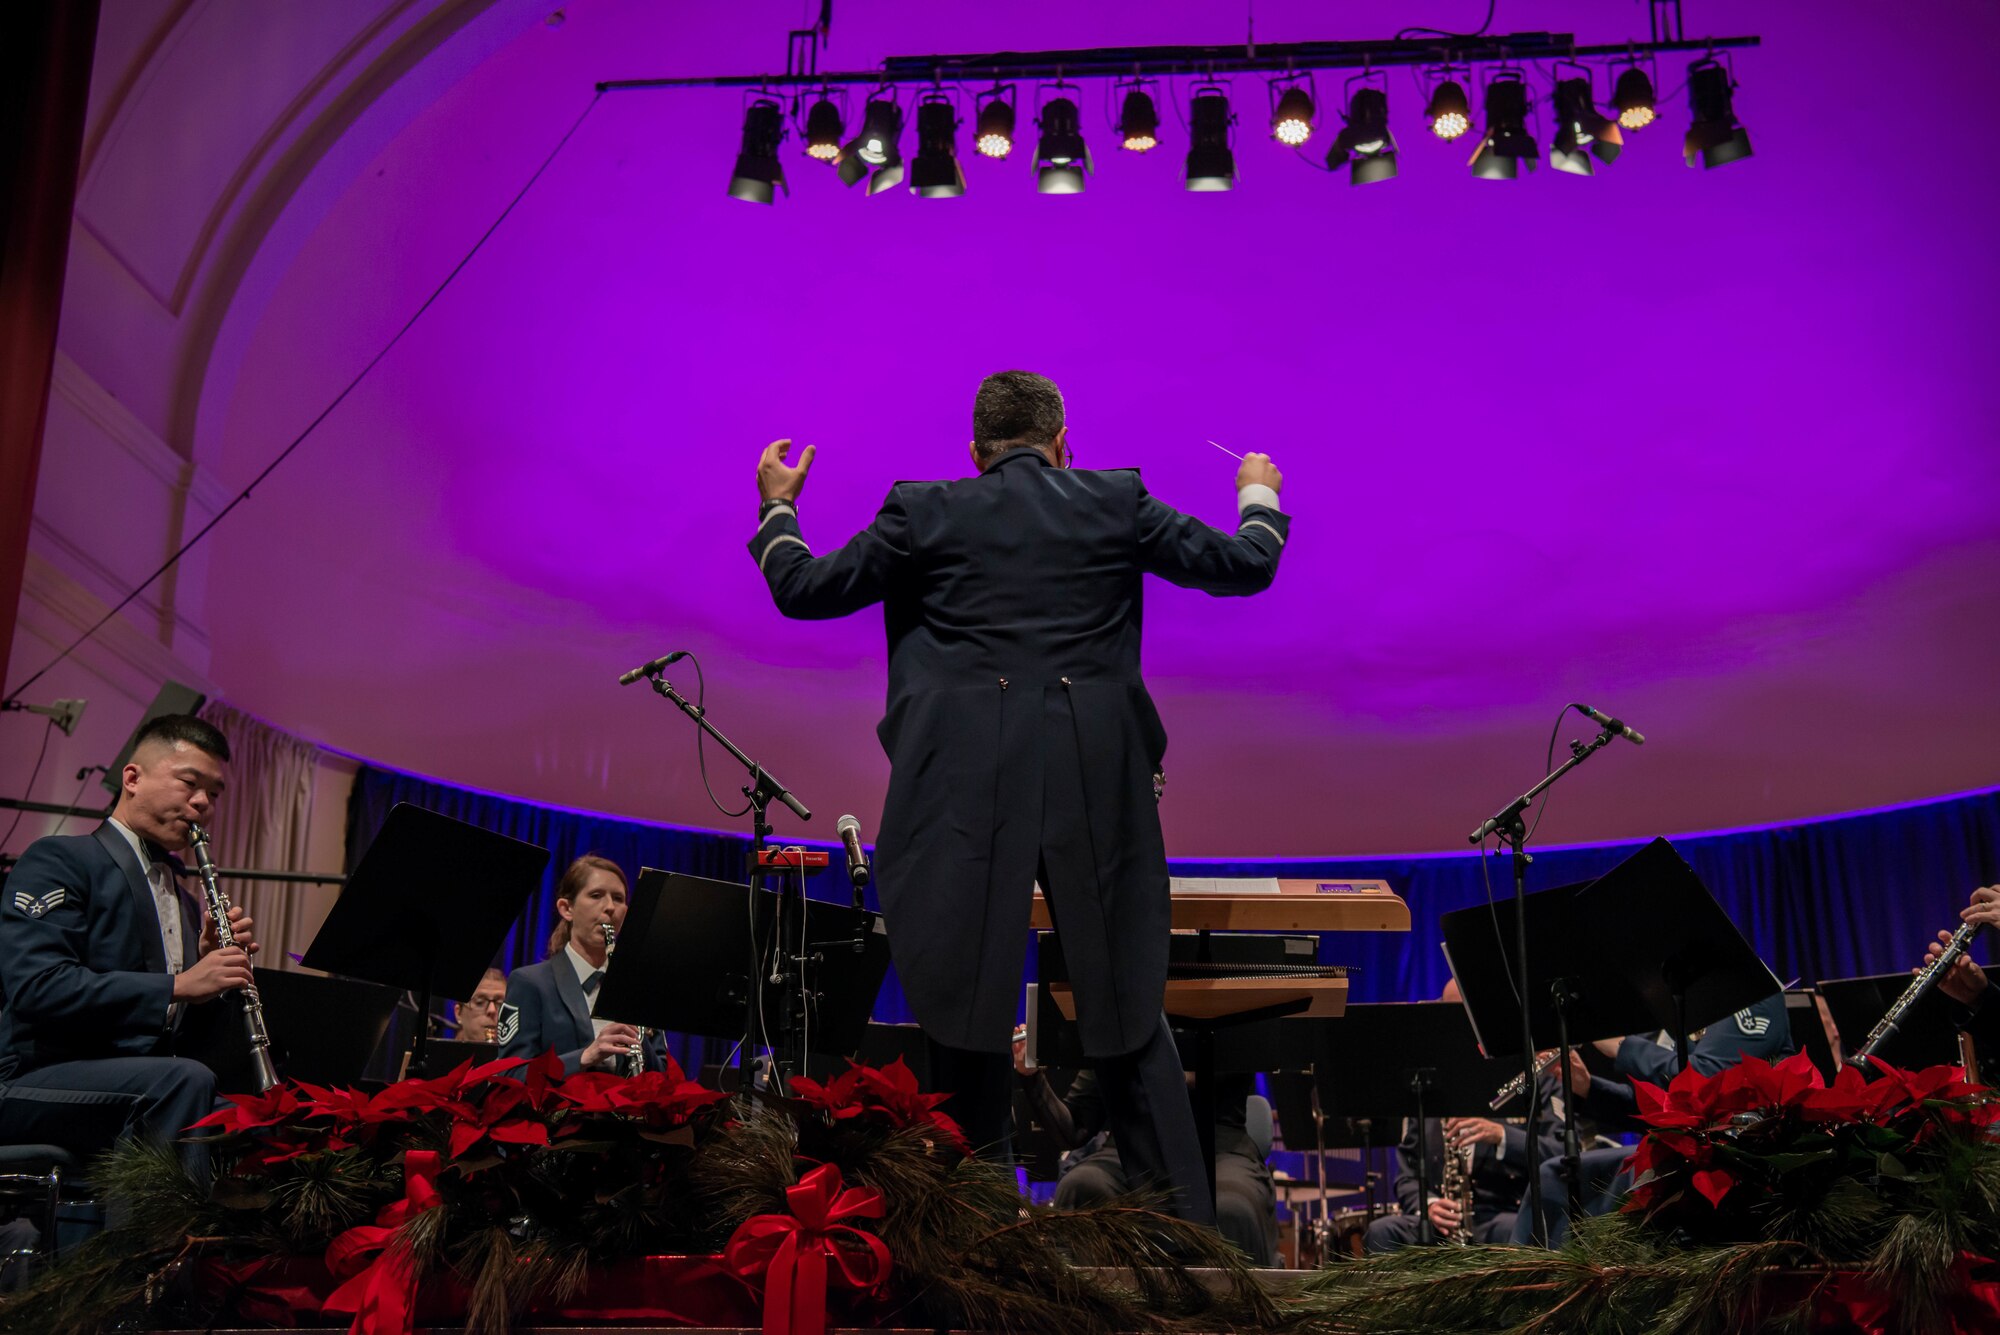 Conductor conducts a band during holiday concert